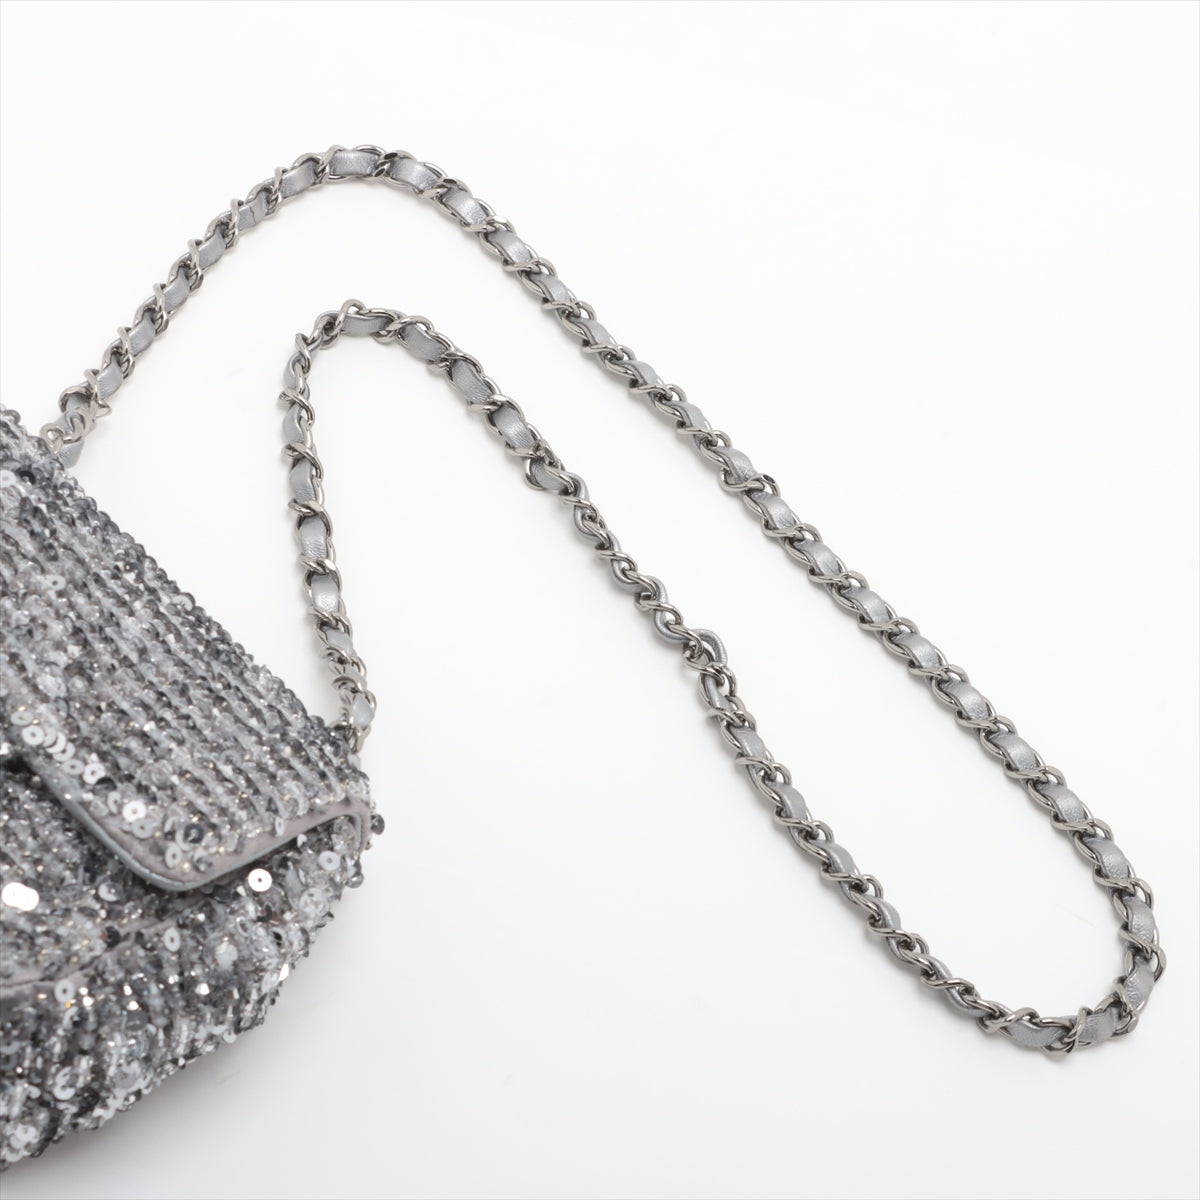 Chanel Coco Mark Sequins x beads x leather Single Flap Single Chain Bag Silver Silver Metal Fittings There is a bead removal AS4269